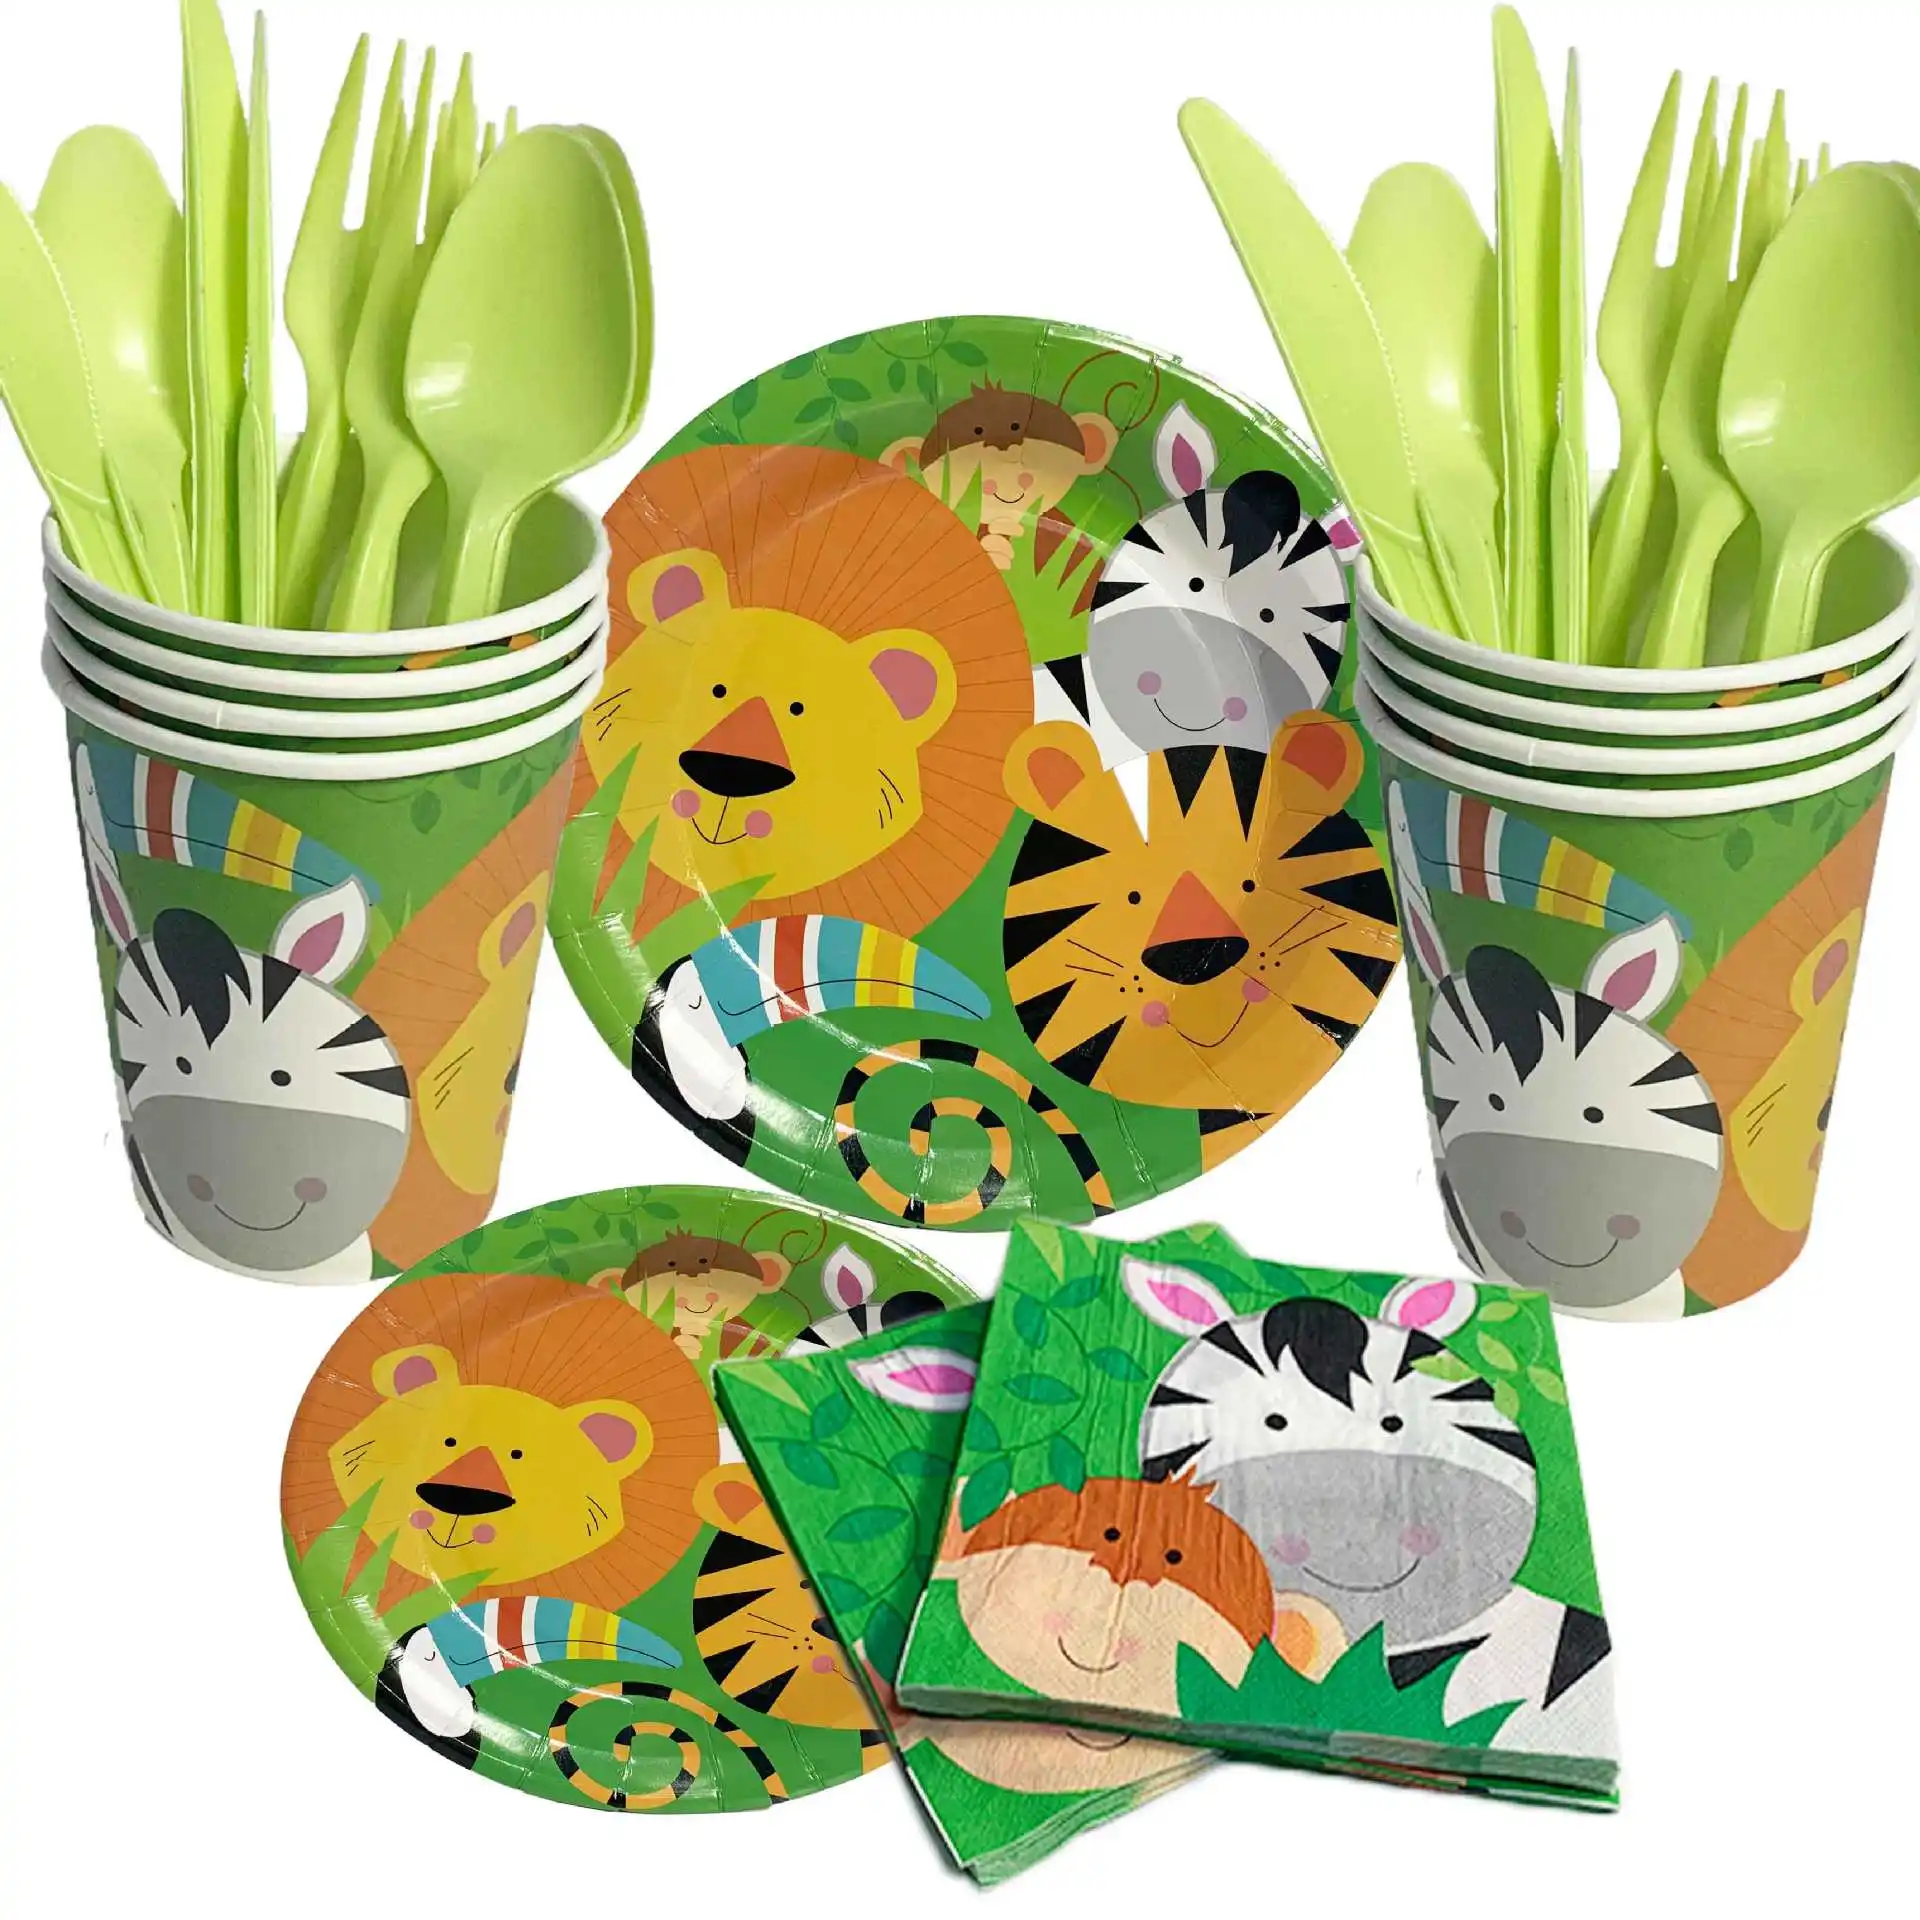 HOWAF 30 pcs Jungle Animal Party Decoration,Jungle Animals Hanging Swirl Safari Party Forest Animal Theme Supplies for Baby Shower Kids Birthday Party 